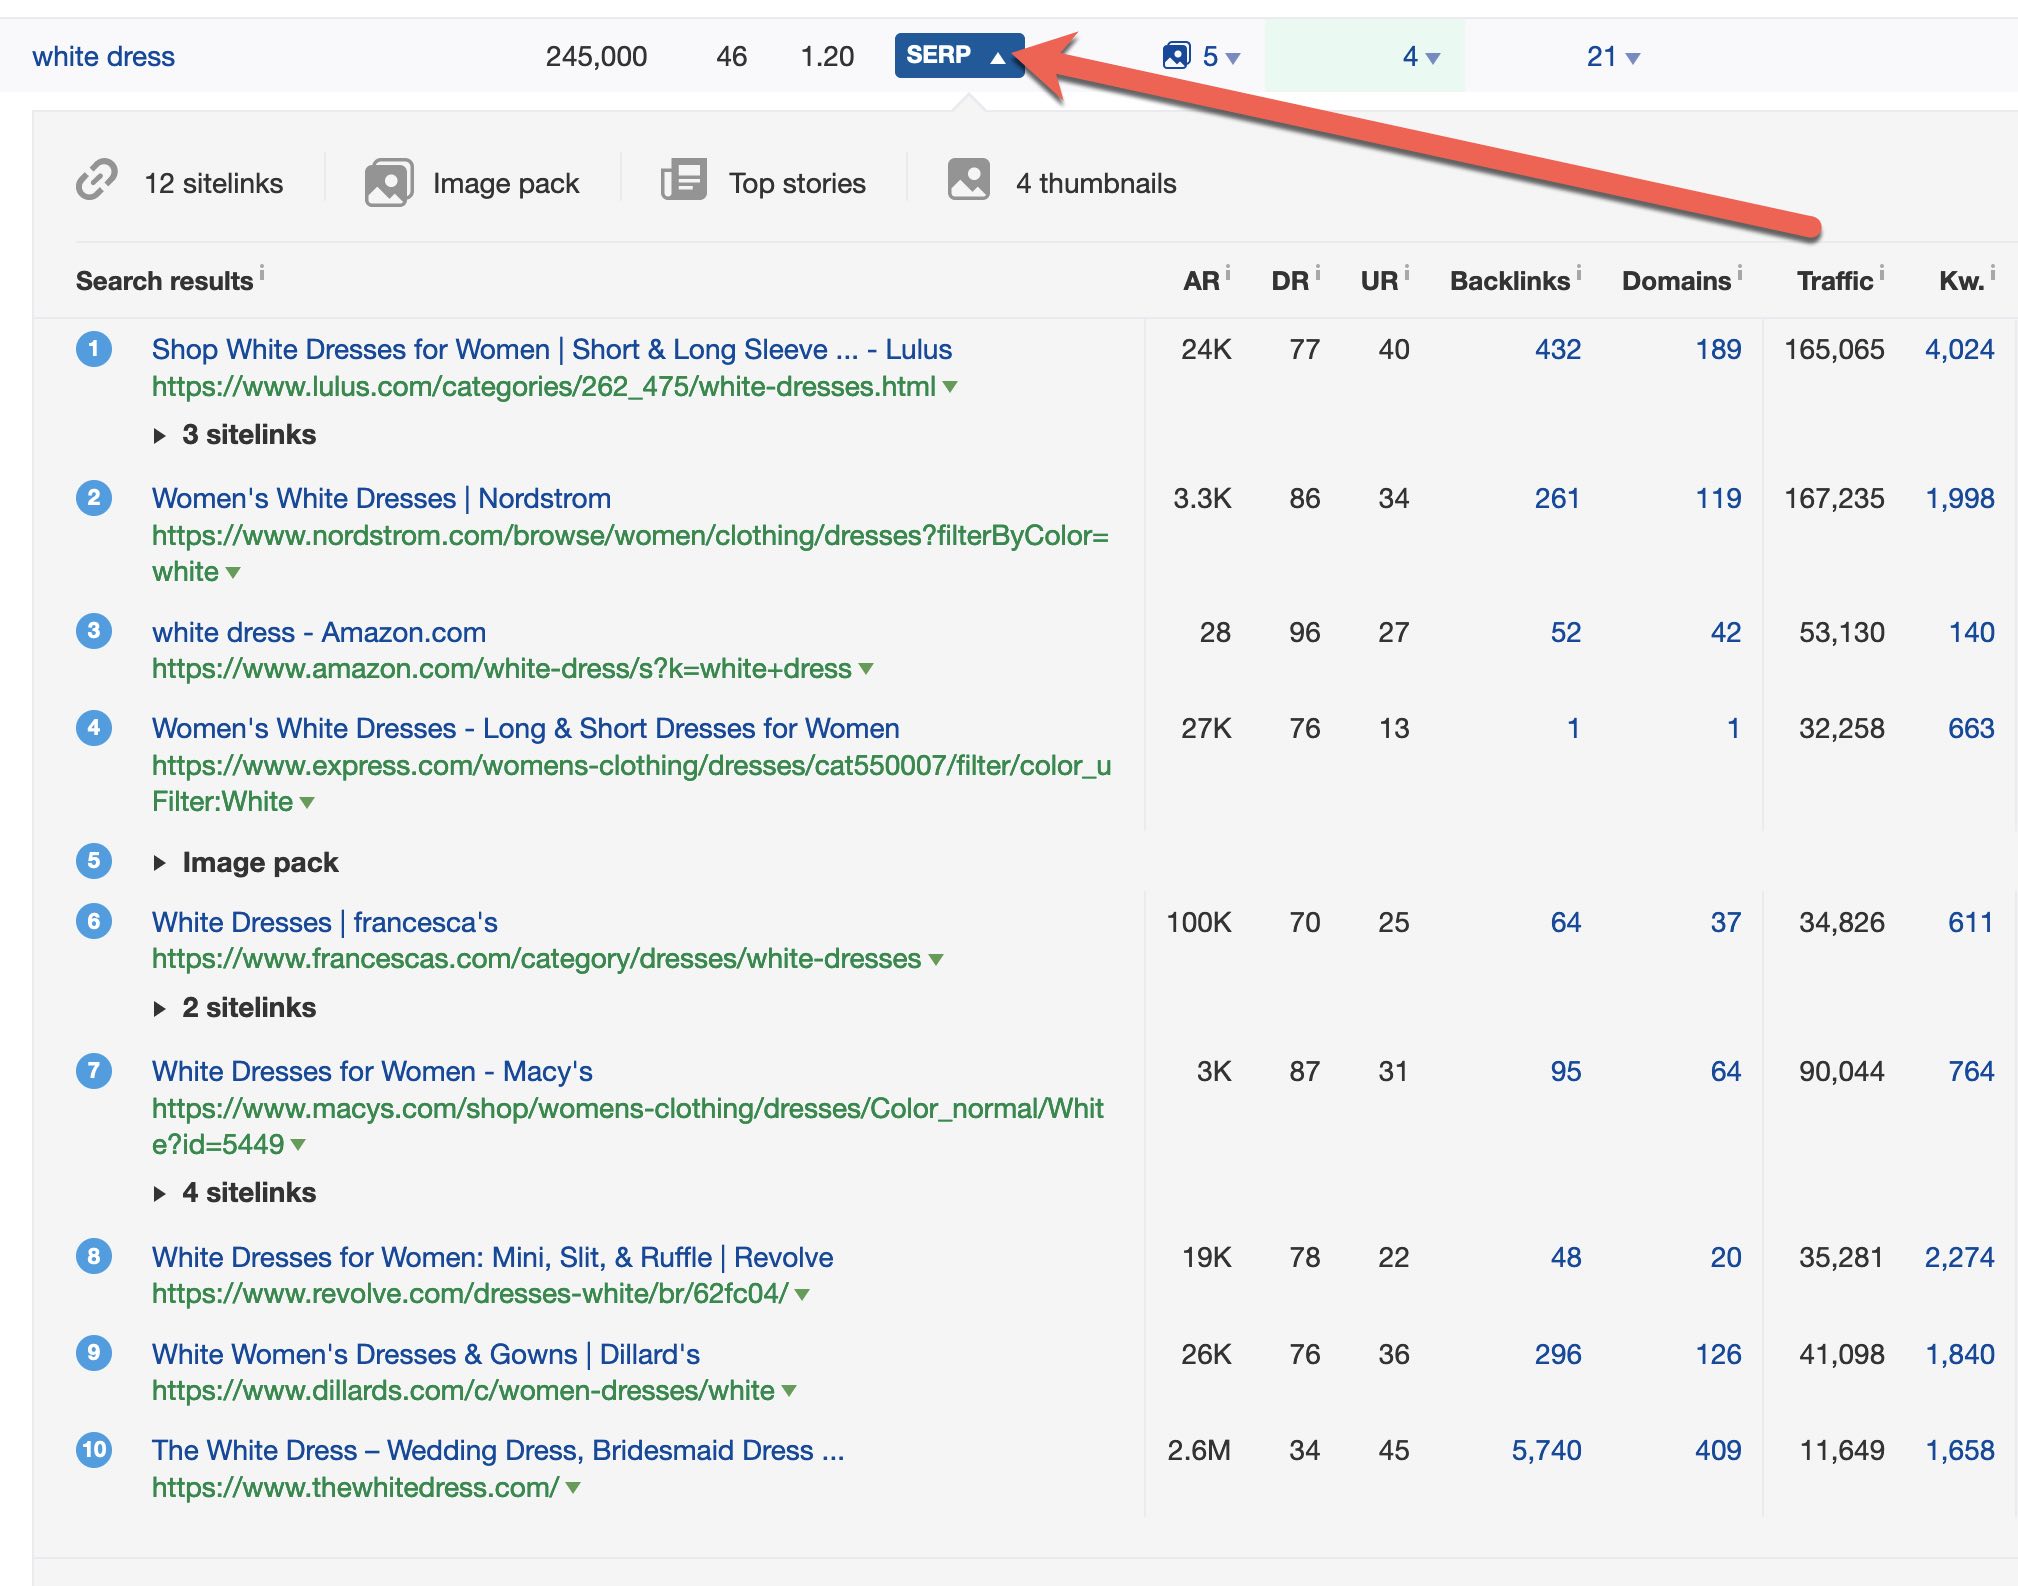 Screenshot of Ahrefs' page showing the SERP analysis for "white dress"